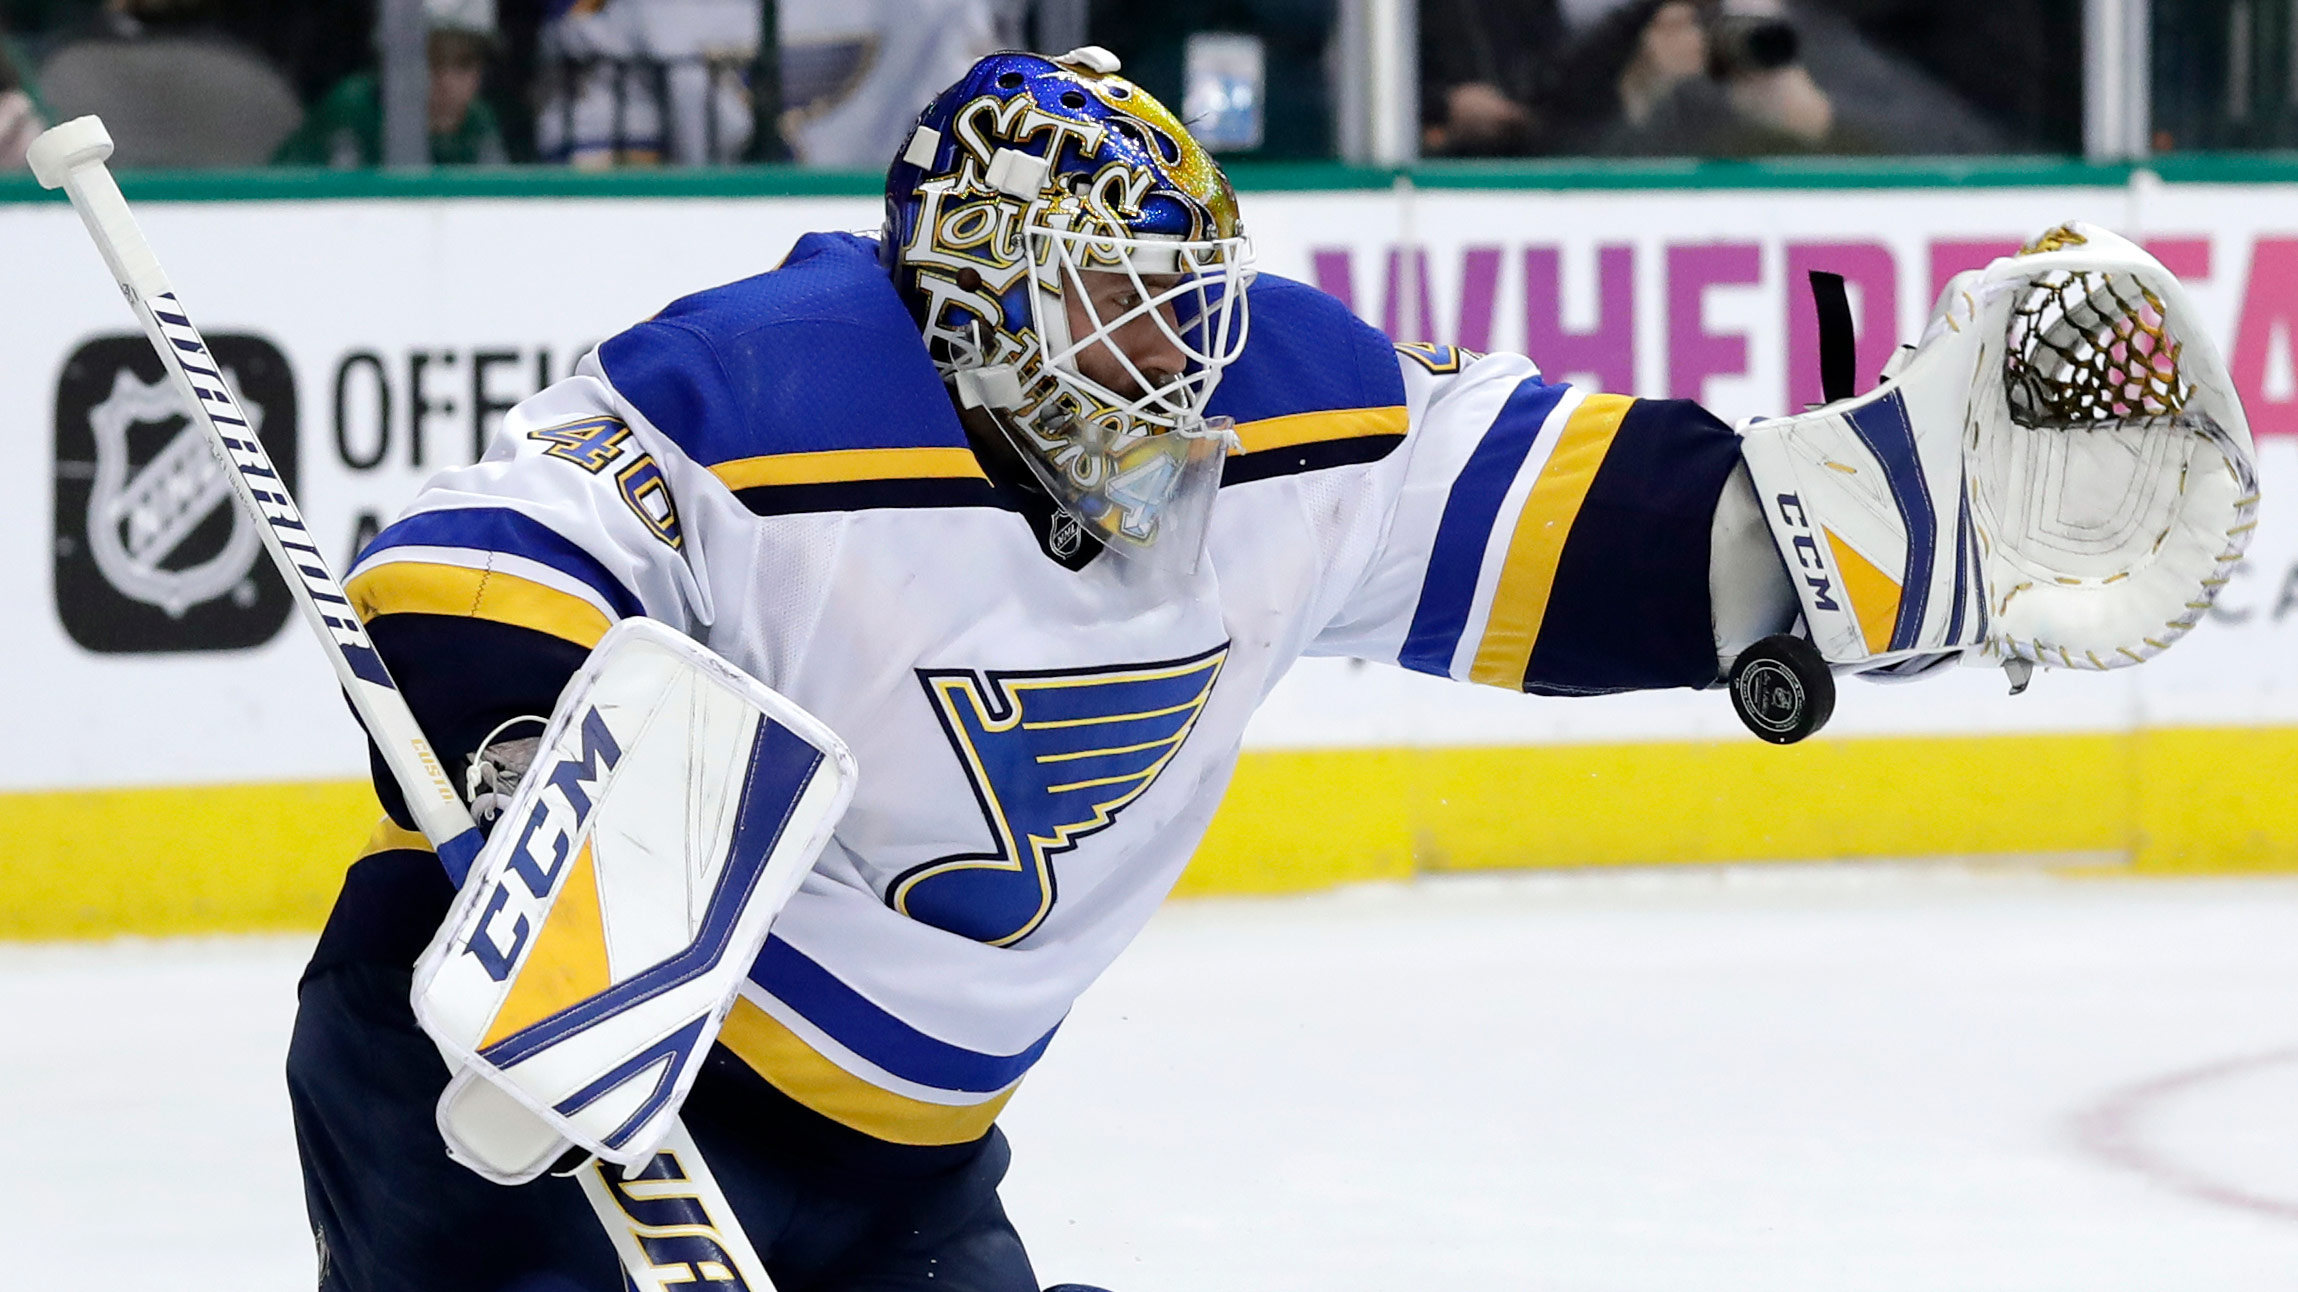 Hutton suffers neck injury, Blues sign emergency backup, recall Ville Husso